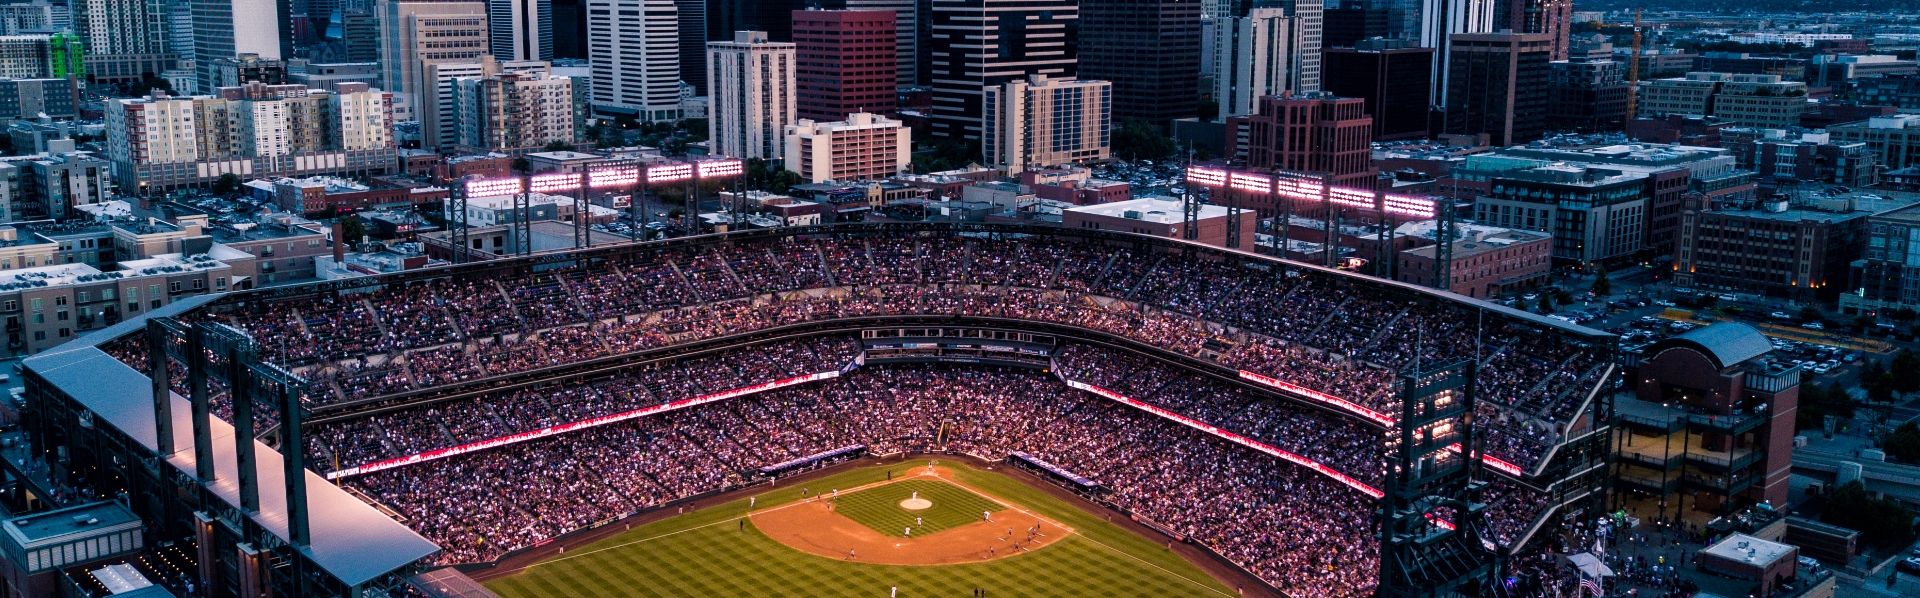 drone countermeasures for stadiums and arenas